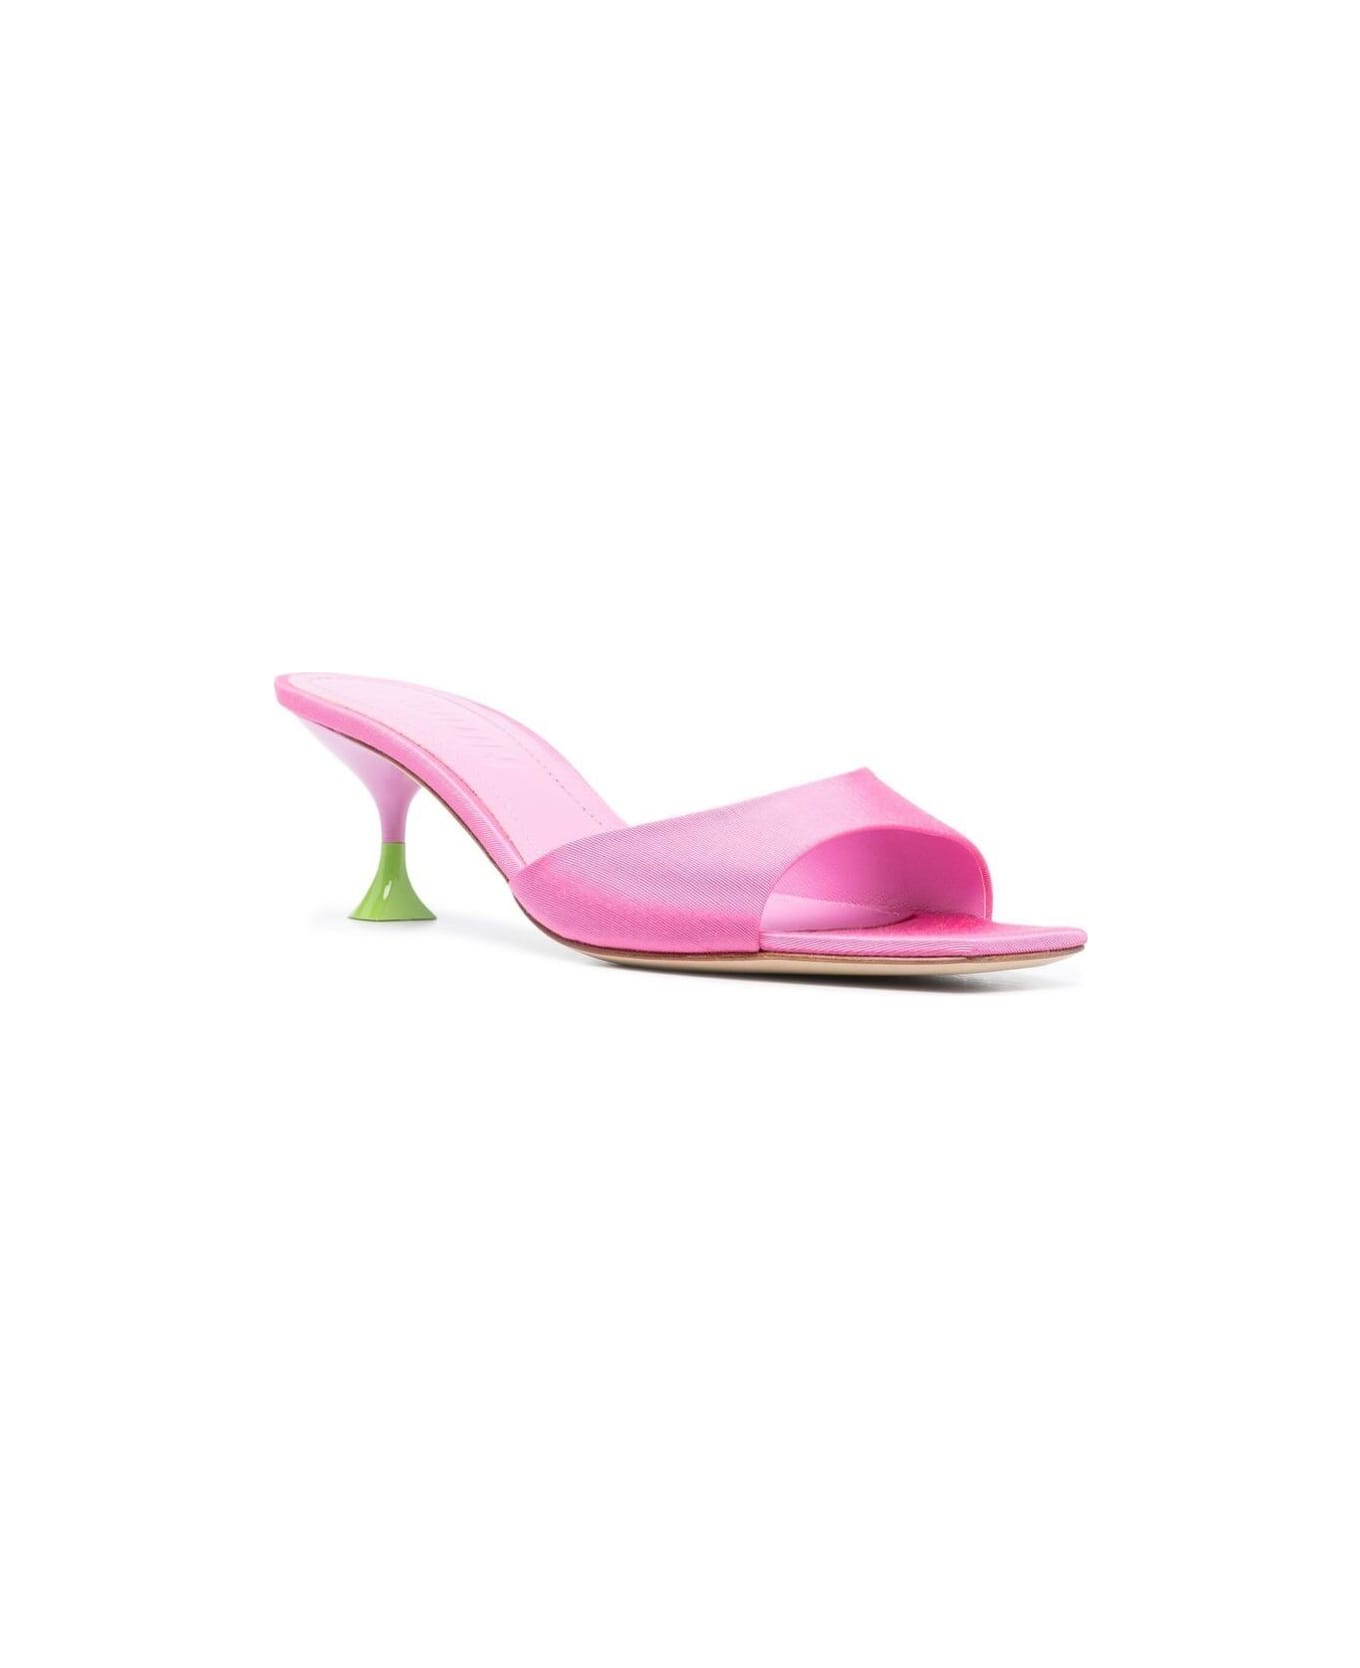 3JUIN 'kimi' Pink Sandals With Contrasting Enamelled Heel In Viscose Woman - Pink